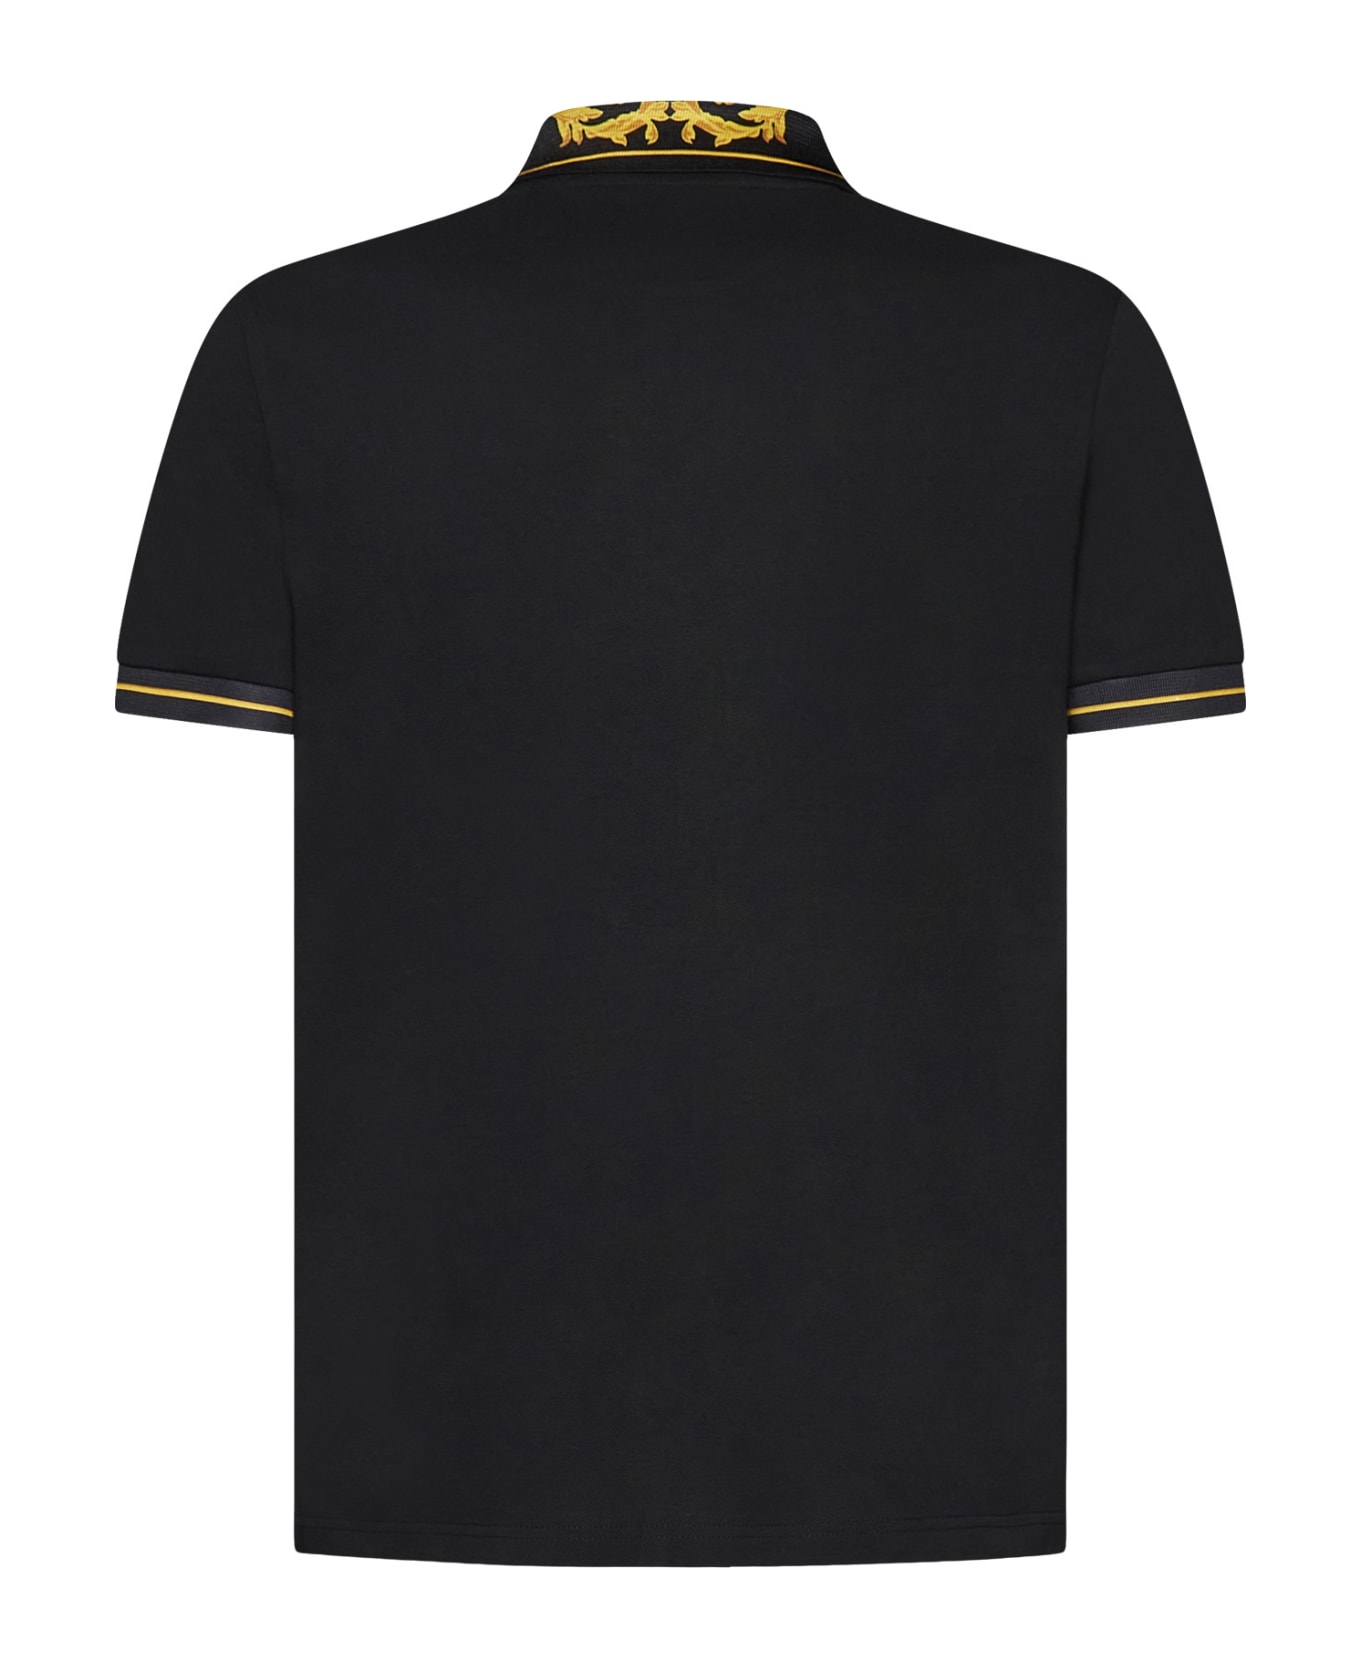 Versace Jeans Couture Baroque-pattern Polo Shirt - black